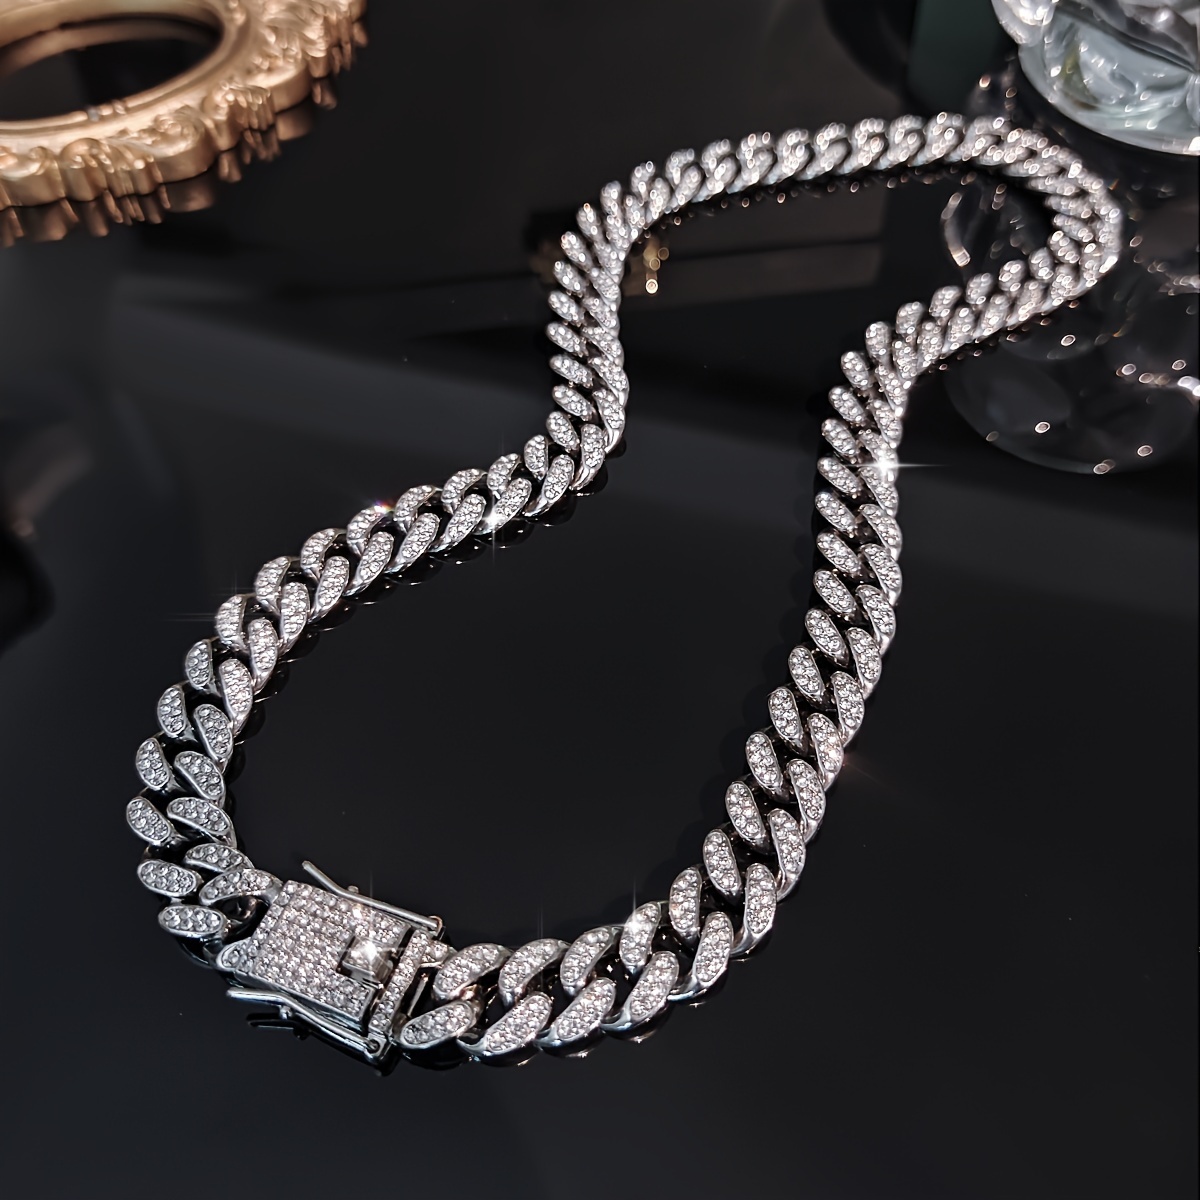 Men's Silver Stainless Steel Curb Chain Necklace. Waterproof. Gift for Teen Boy 18 / 5 mm